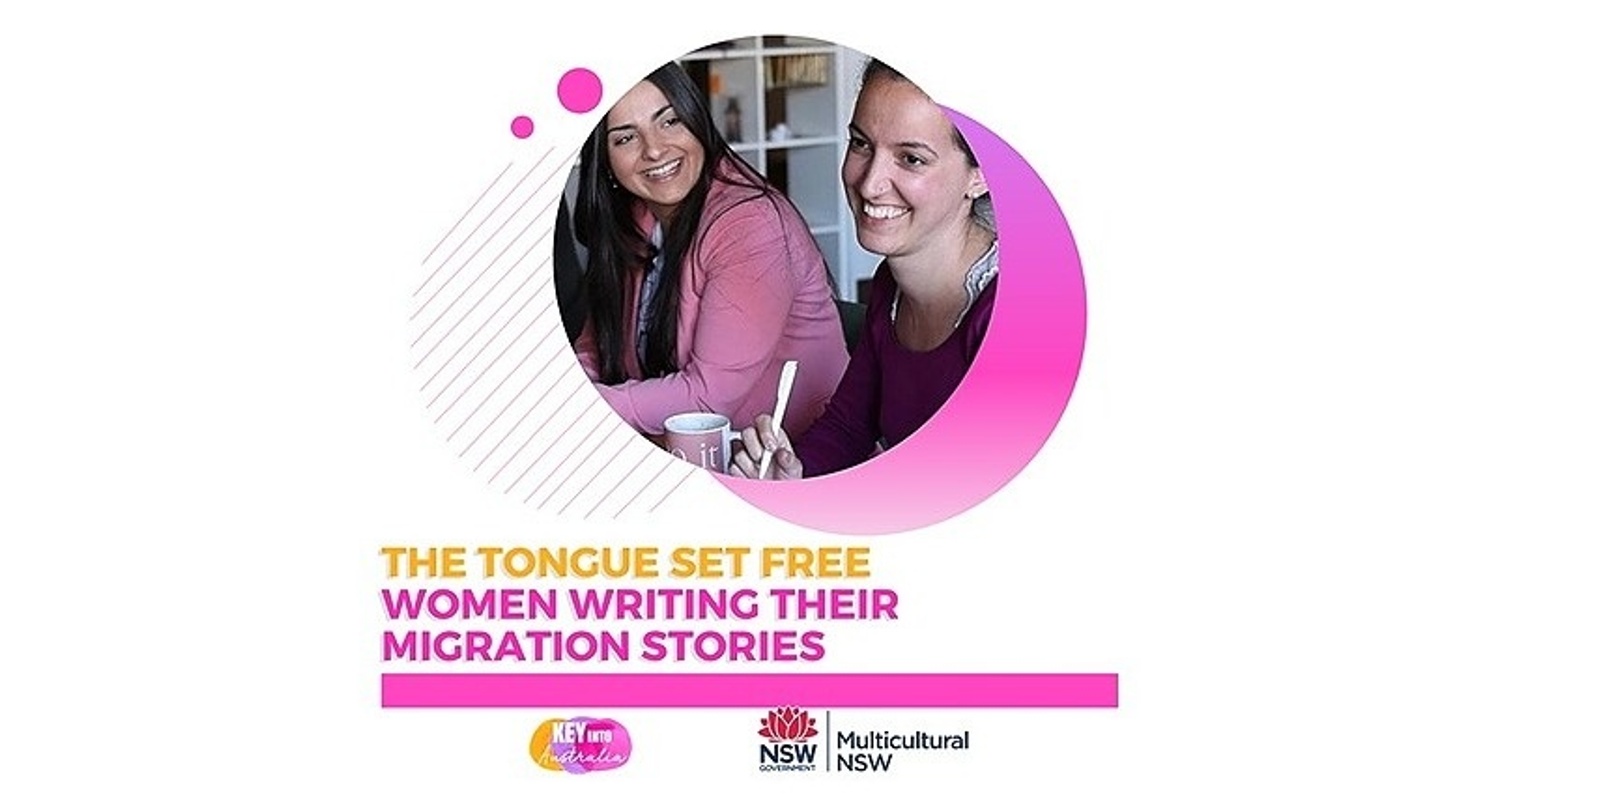 The Tongue Set Free: Women writing migration stories